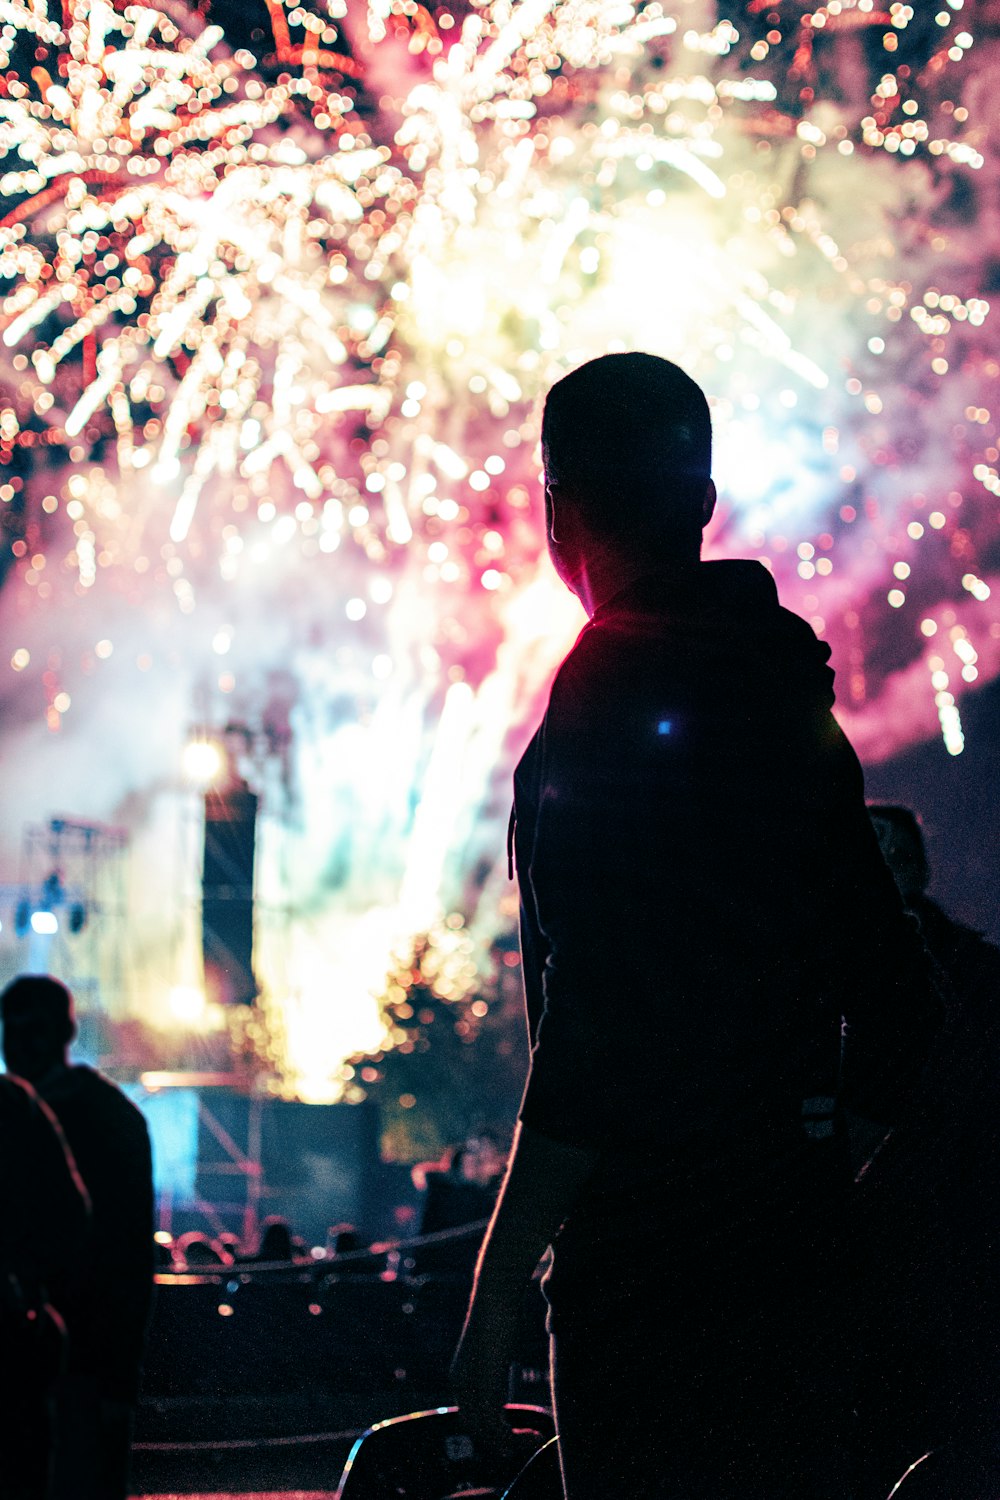 silhouette of man standing in front of fireworks display